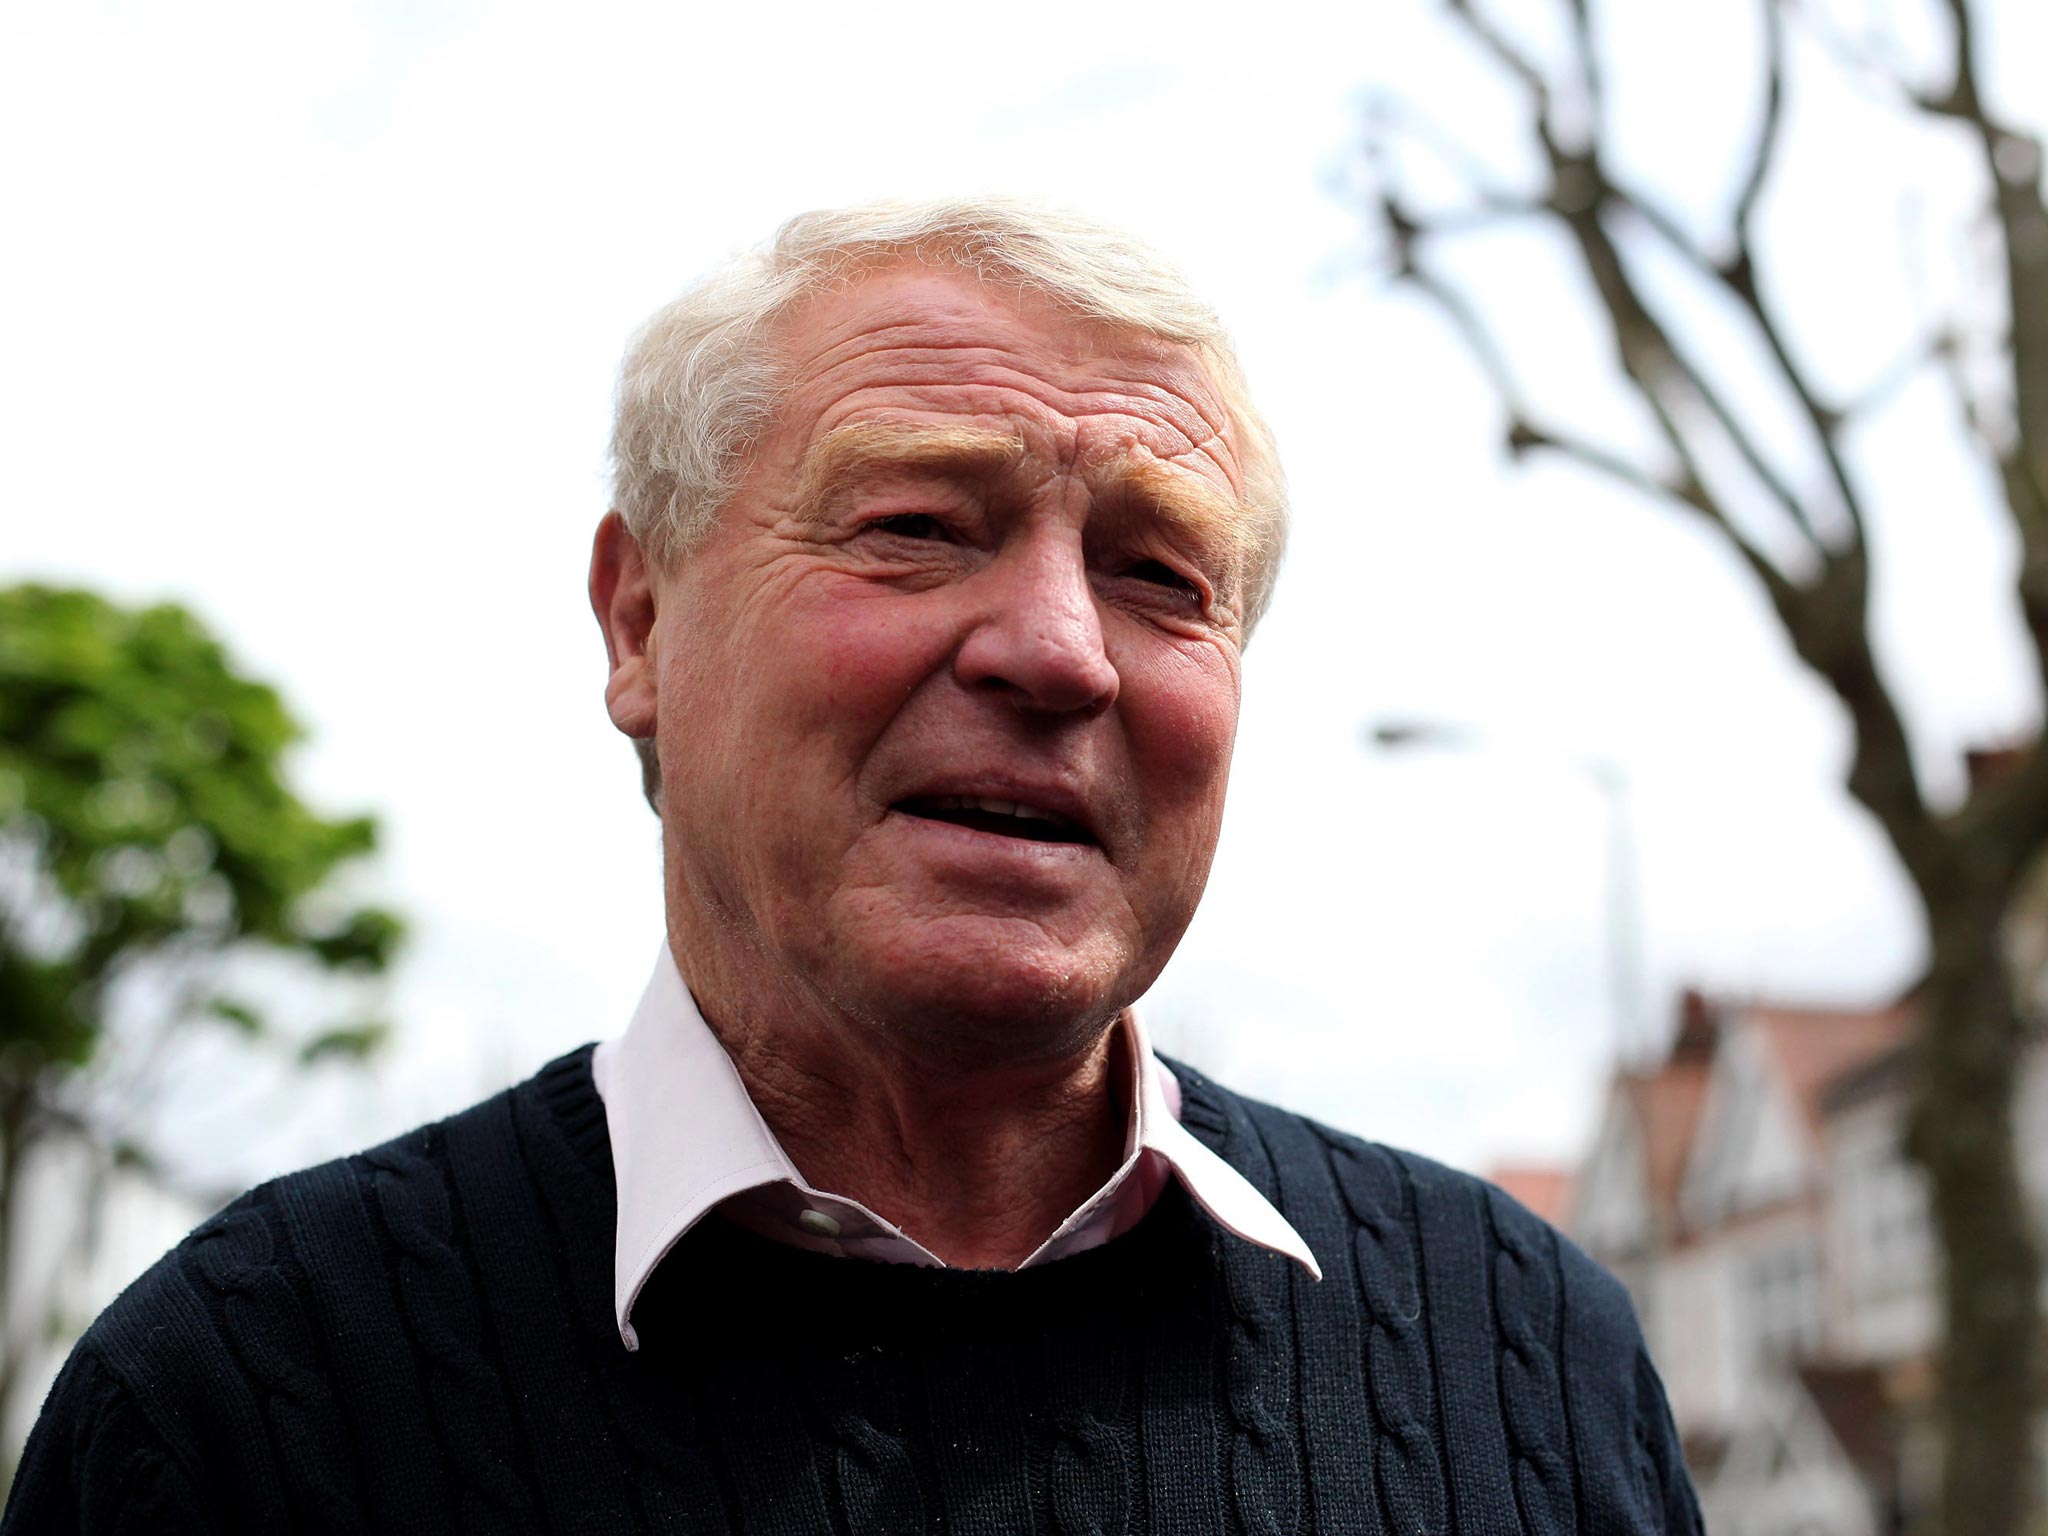 The former Liberal Democrat party leader Paddy Ashdown said he was 'very upset' after being involved in a fatal three-vehicle collision